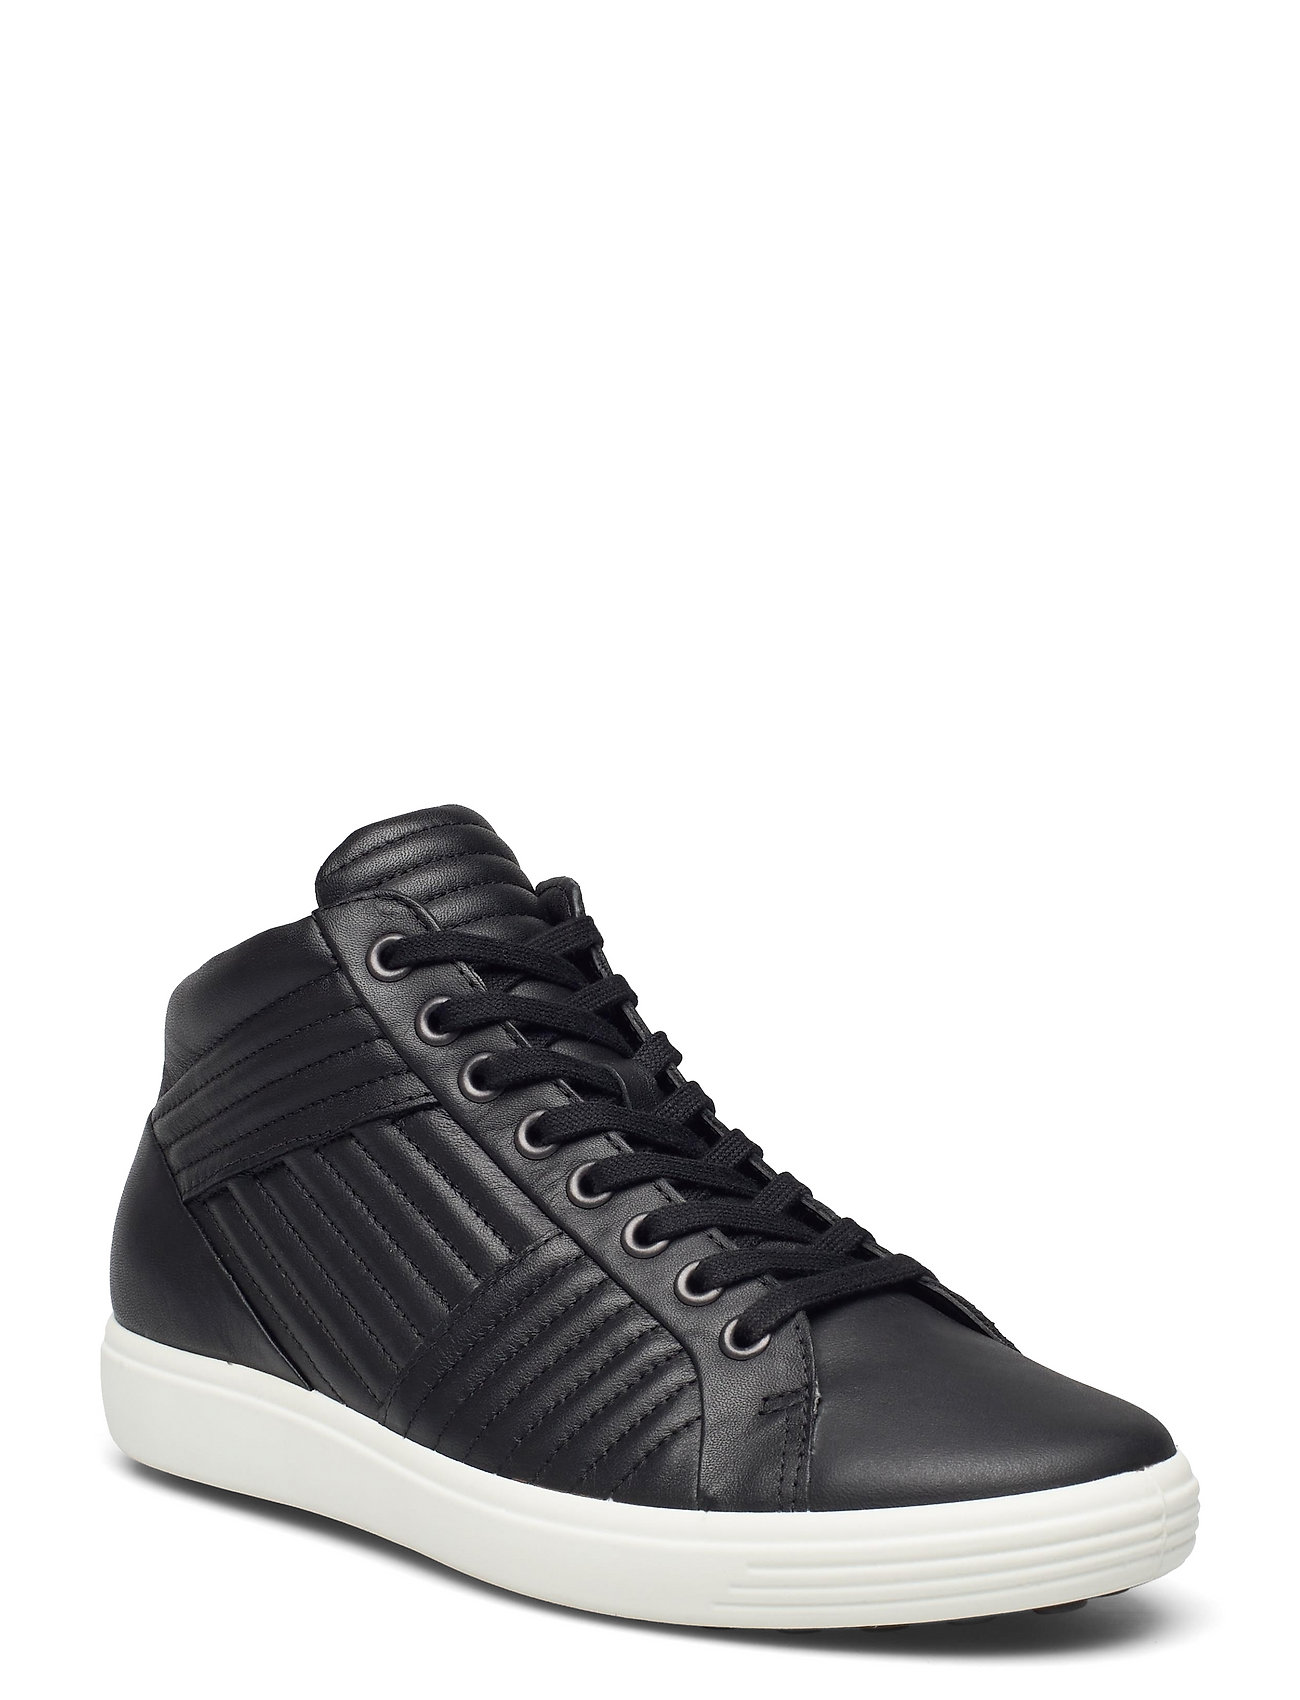 ECCO Soft 7 W (Black), (72 €) | Large of outlet-styles | Booztlet.com